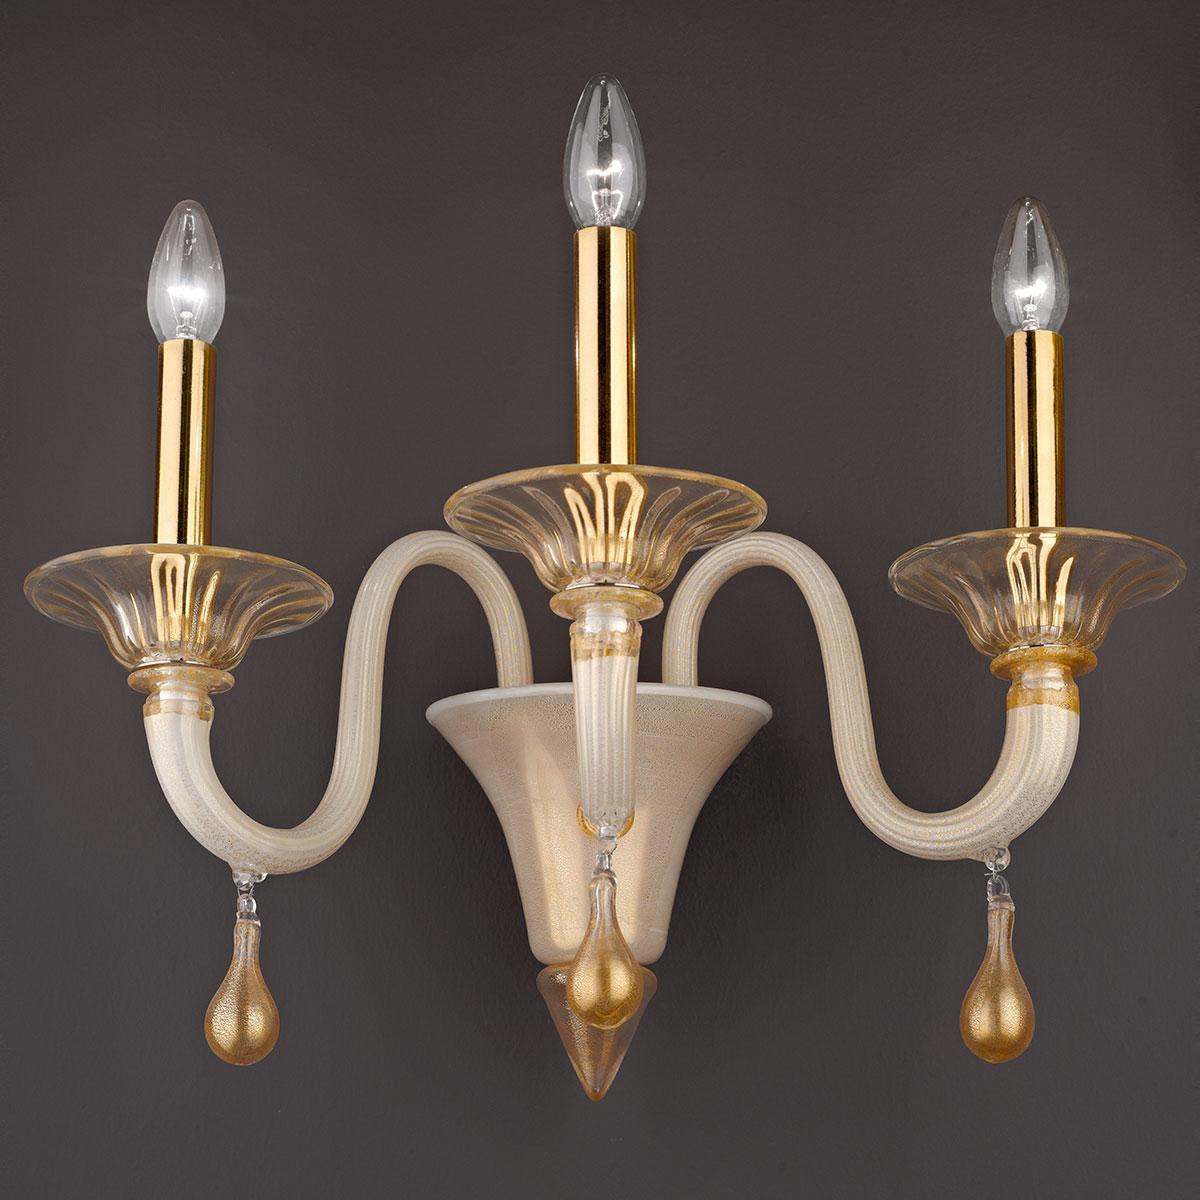 "Daphne" Murano glass sconce - white and gold -